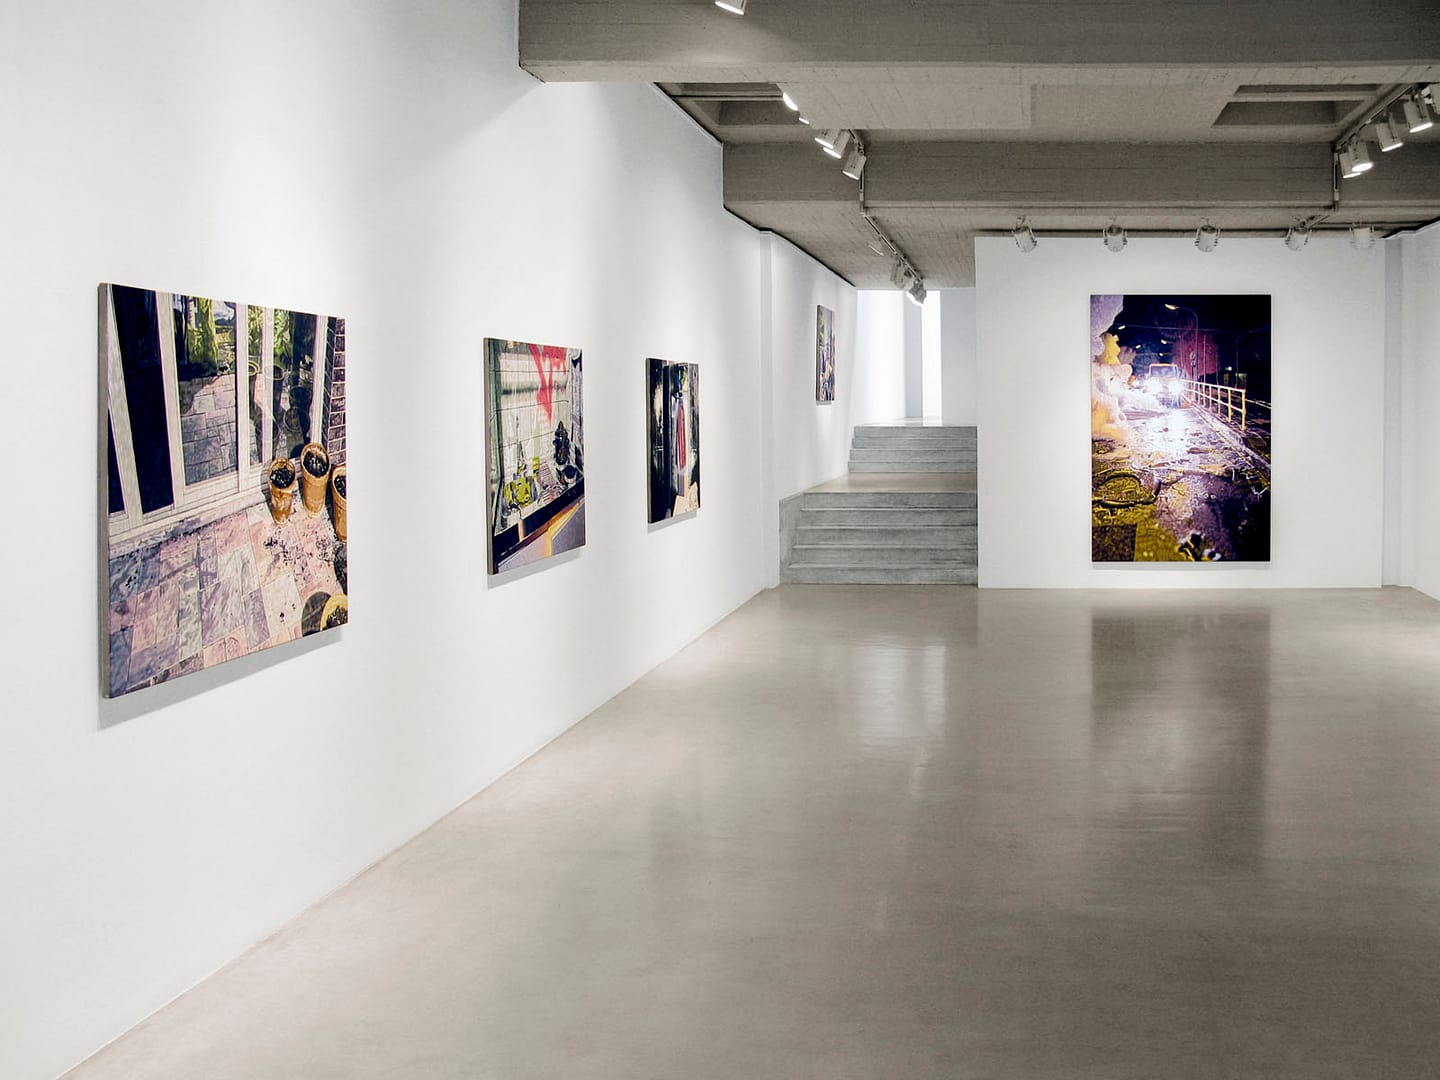 Exhibition view from the solo show "Scare the Night Away" by Philipp Fröhlich at Soledad Lorenzo gallery in Madrid, Spain, 2010. The photo shows the main space of the galley with various tempera paintings on canvas.